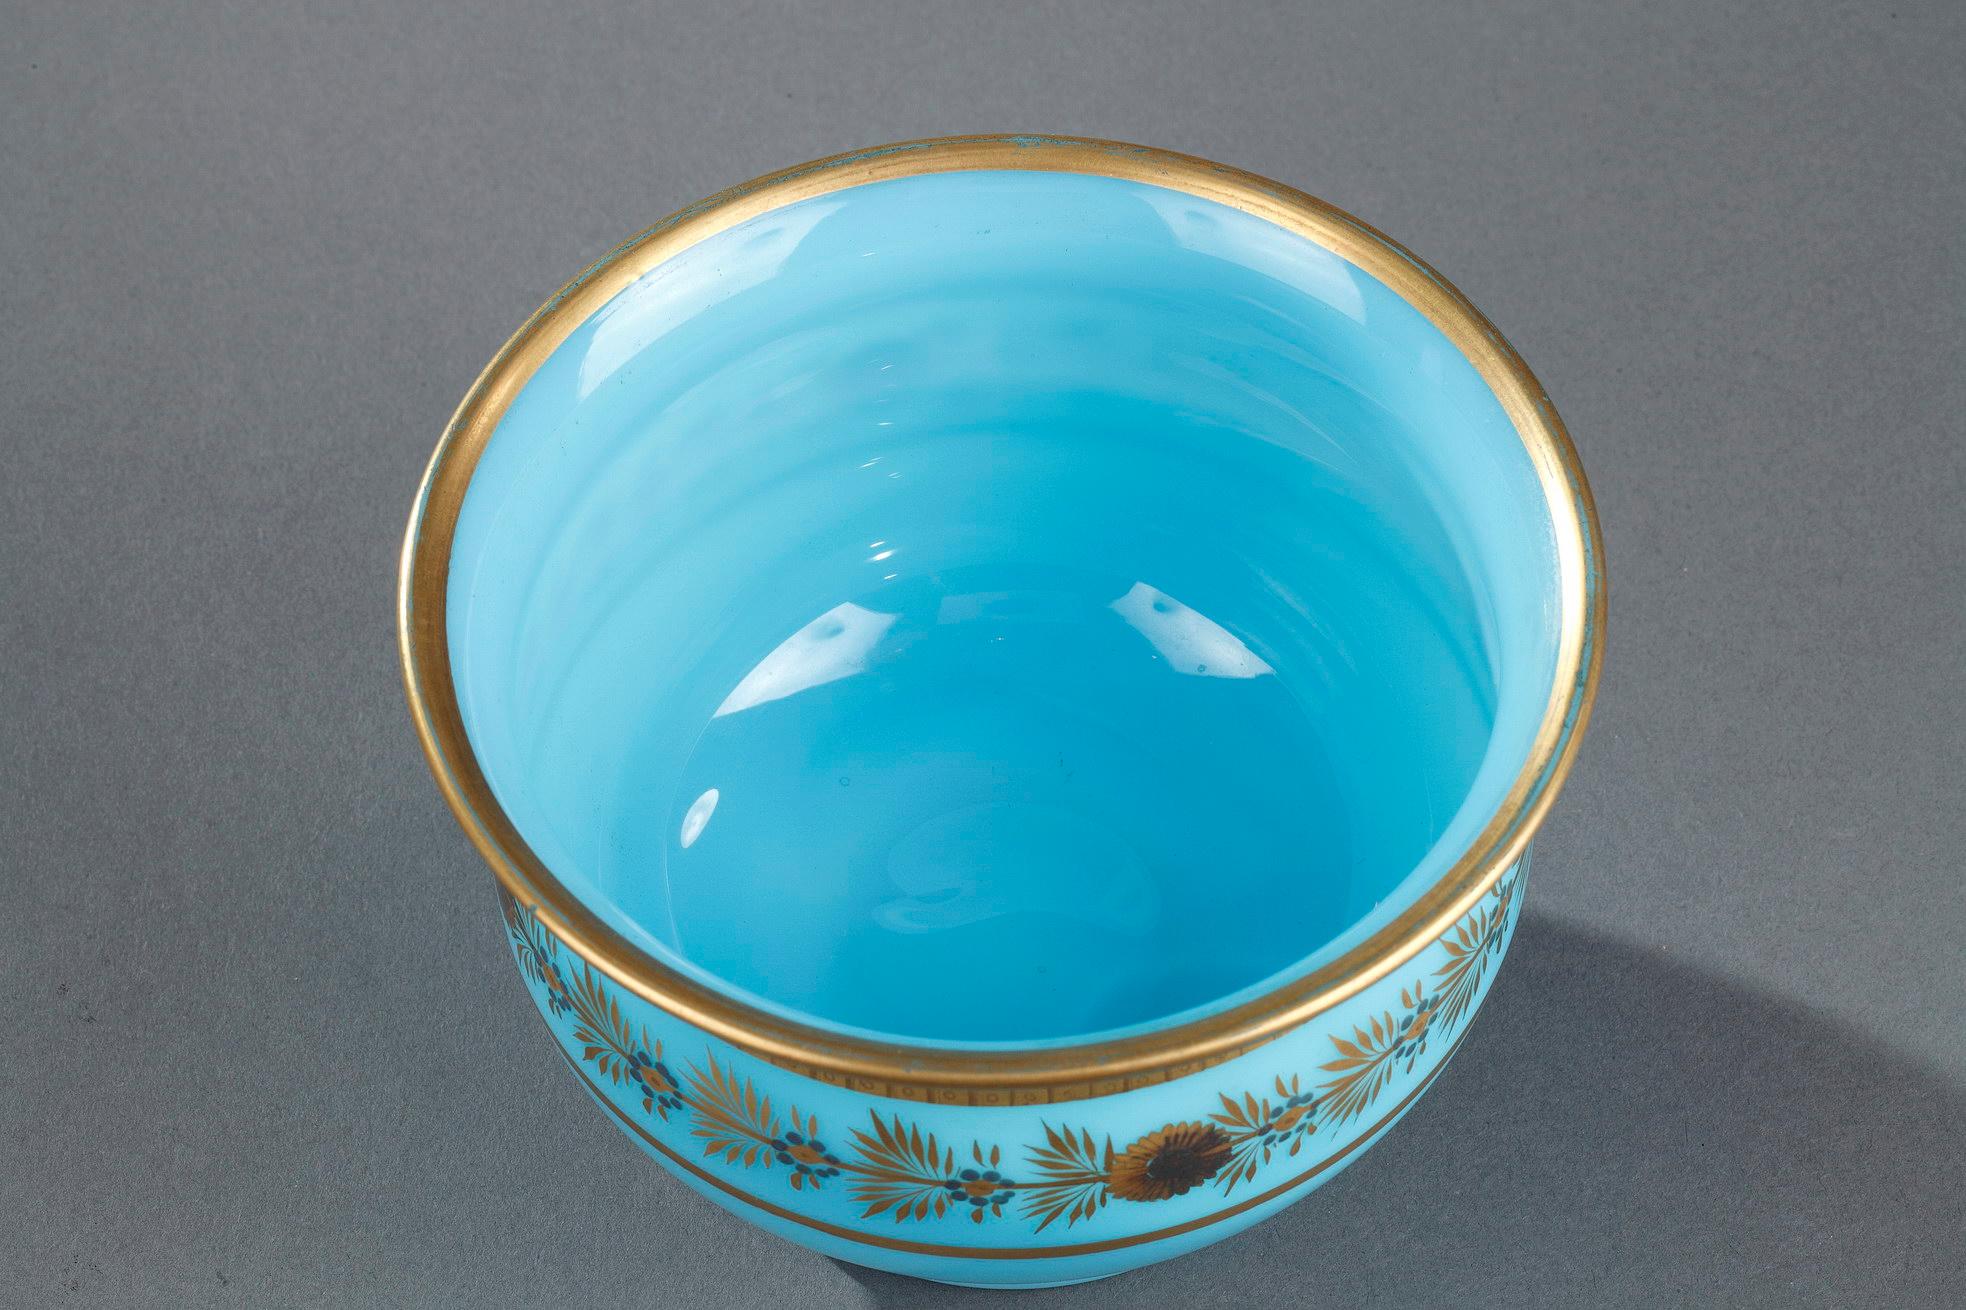 Pair of Early 19th Century Blue Opaline Bowls by Desvignes For Sale 8